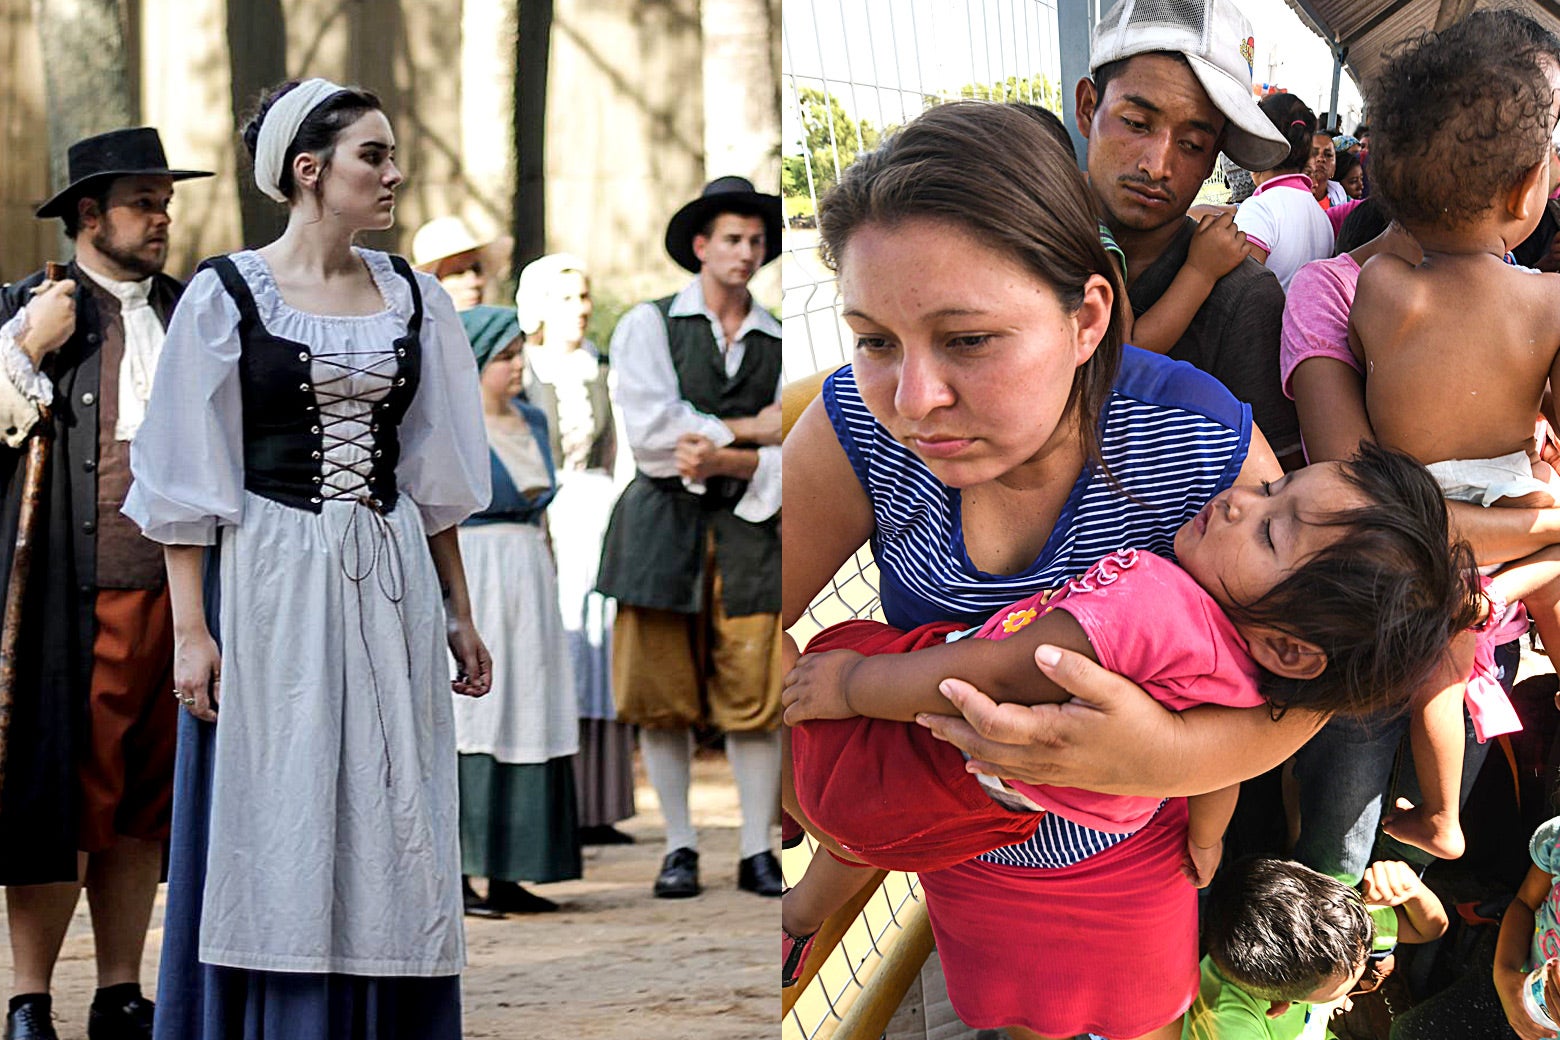 The cast of From This Day Forward juxtaposed with migrants traveling from Honduras.